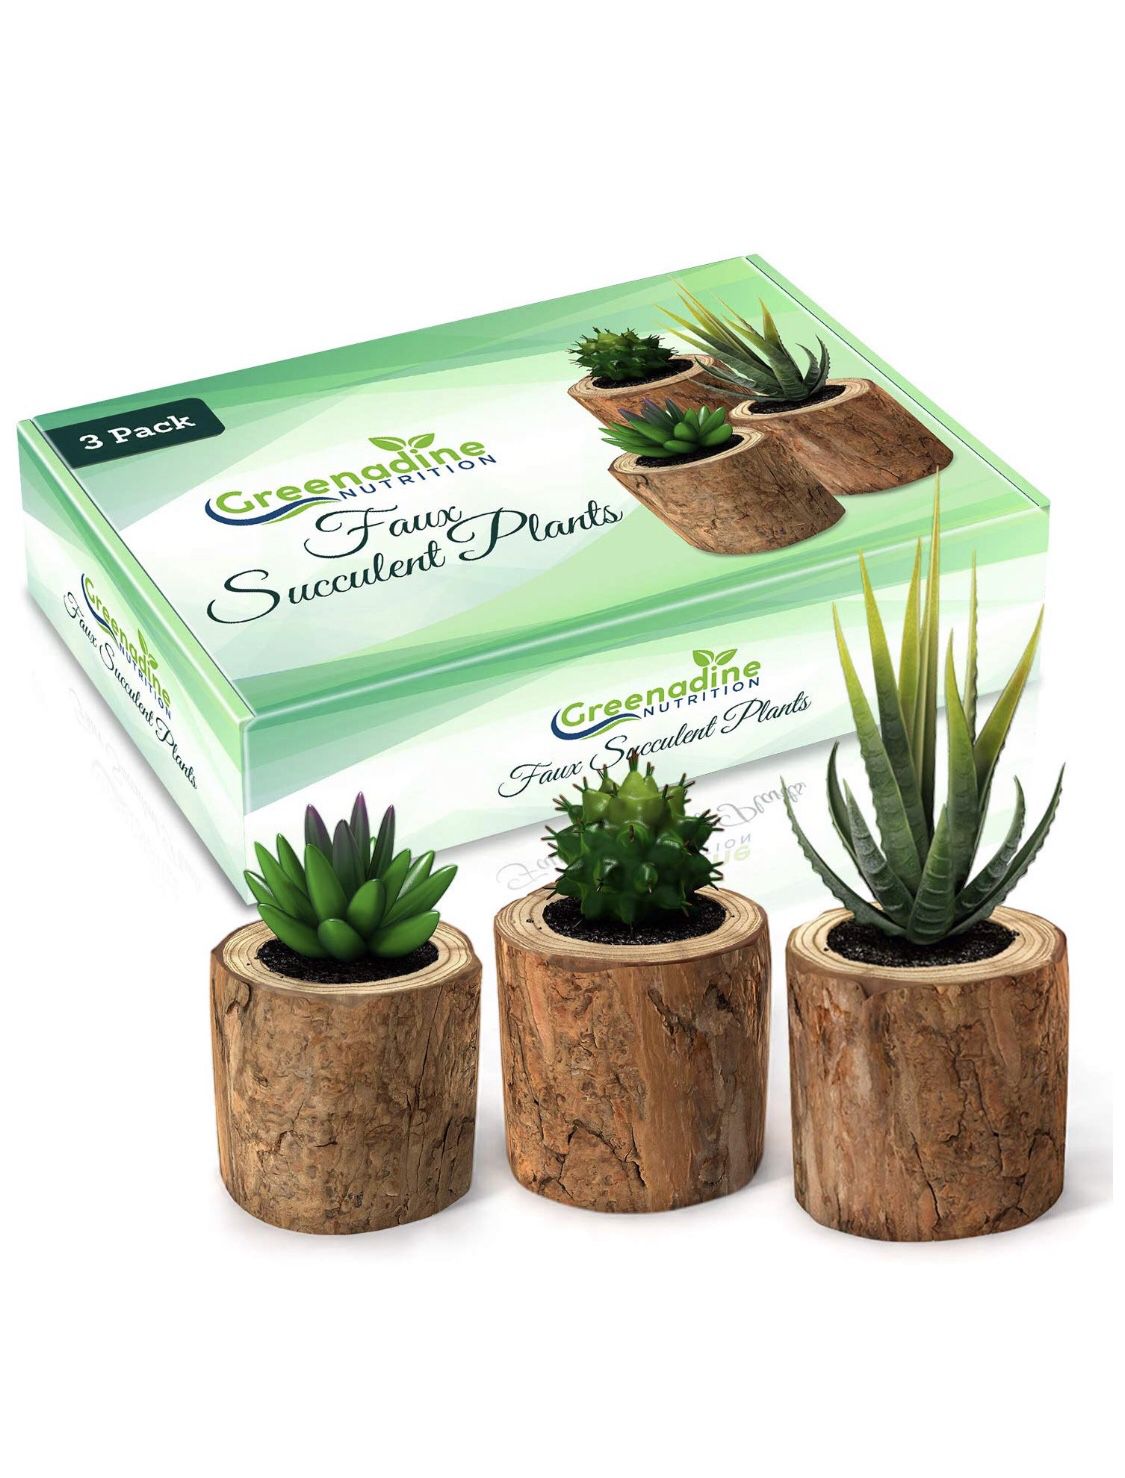 Fake Succulent & Feaux Cactus Plants - Set of 3 | Artificial Plastic Decor in Small Wooden Planter Pot | Real Live Looking Mini Faux Plant for Home,